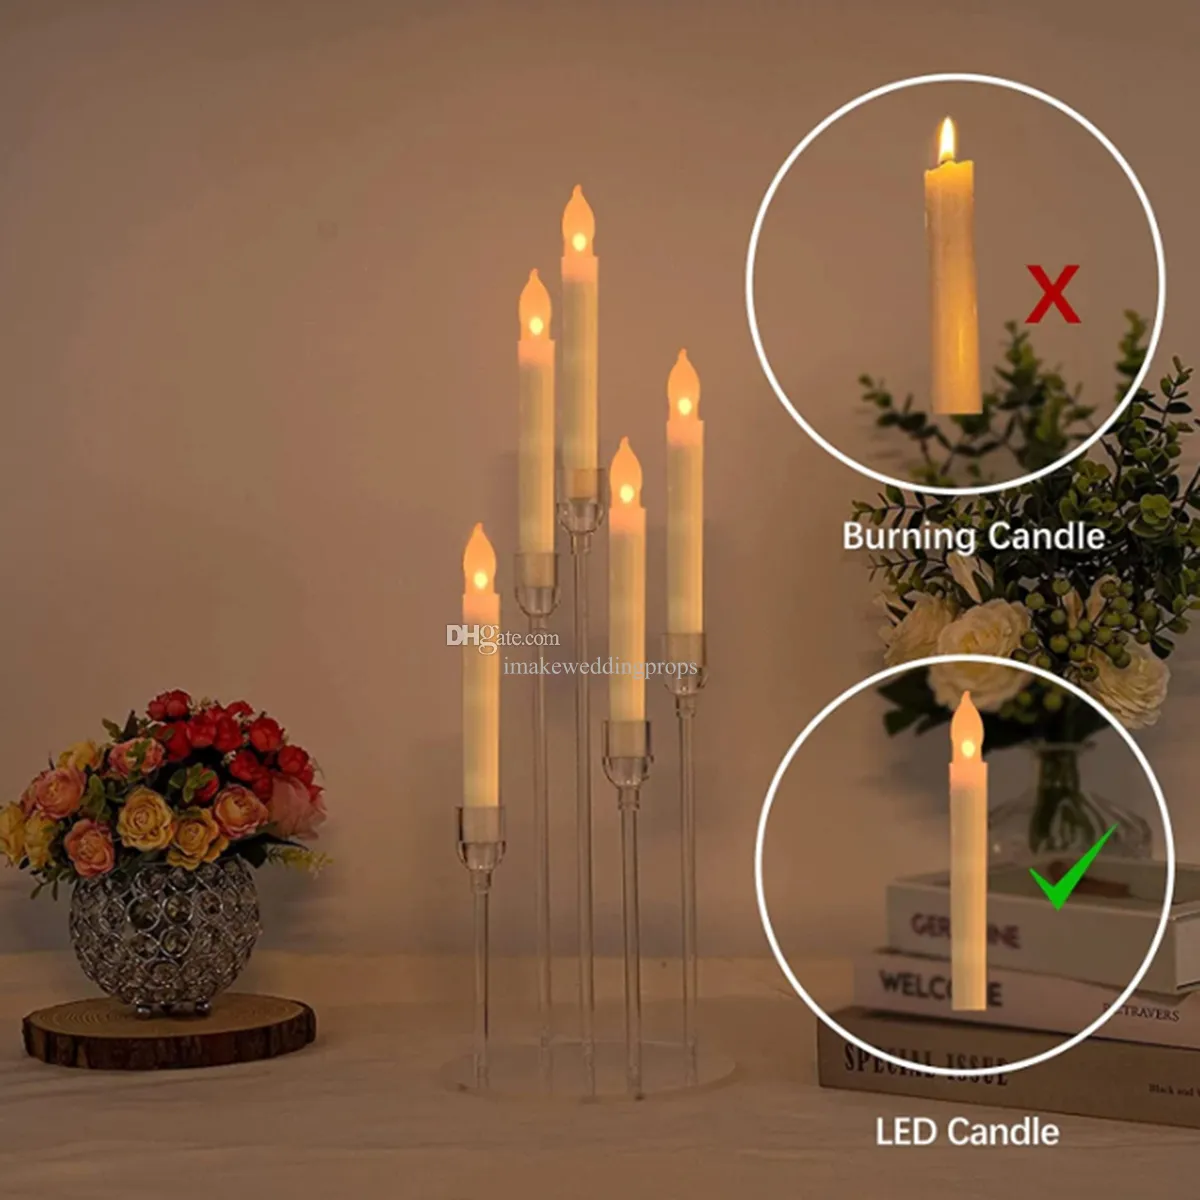 Akryl Candelabra 5 Arms Candle Holder Centerpieces For Wedding Living Room Dinner Table Christ Christmas Decoration Imake864